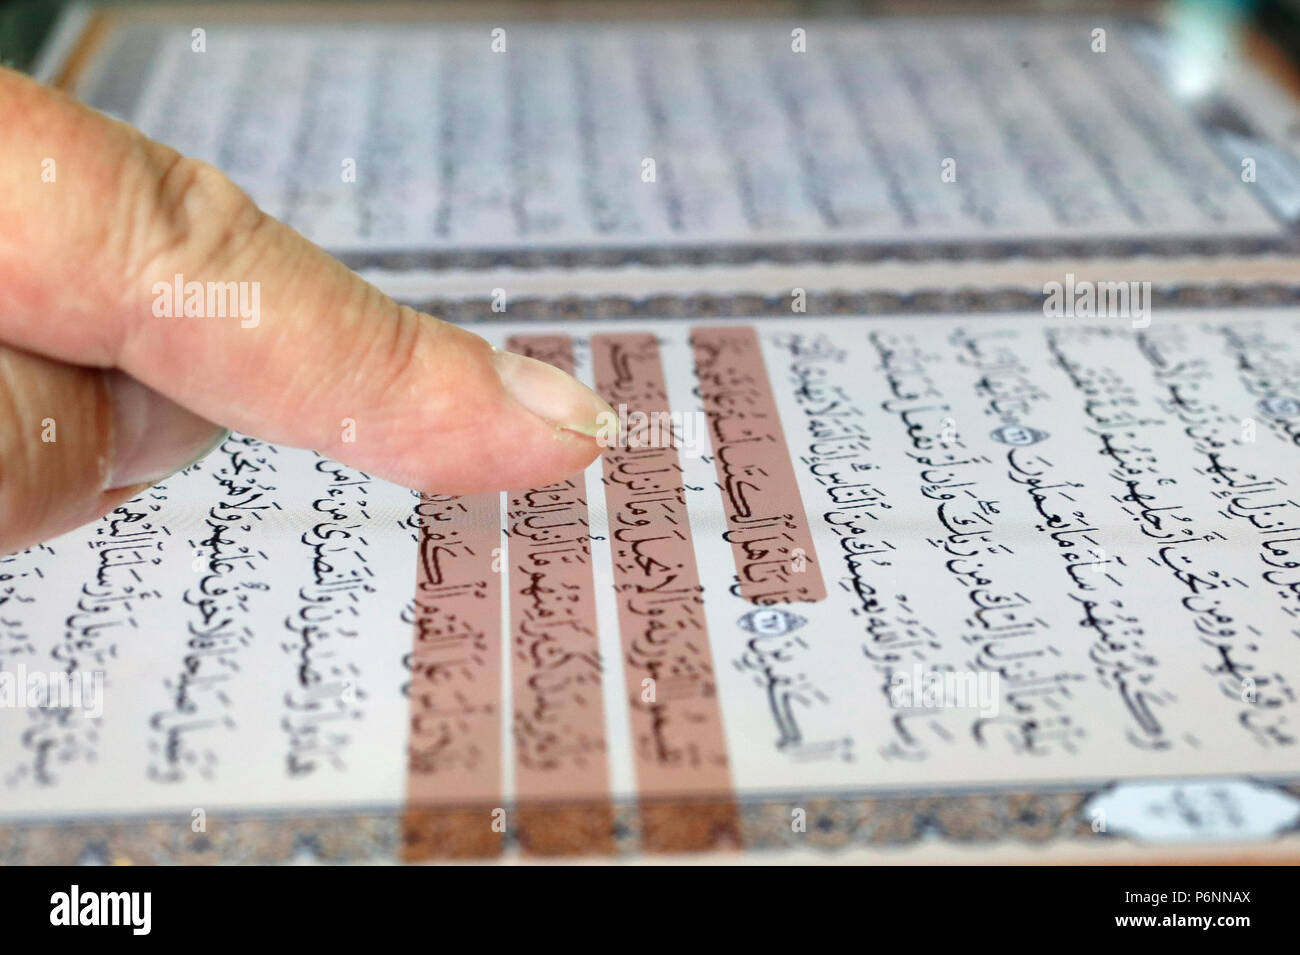 Man reading an electronic Quran on a tablet. Stock Photo